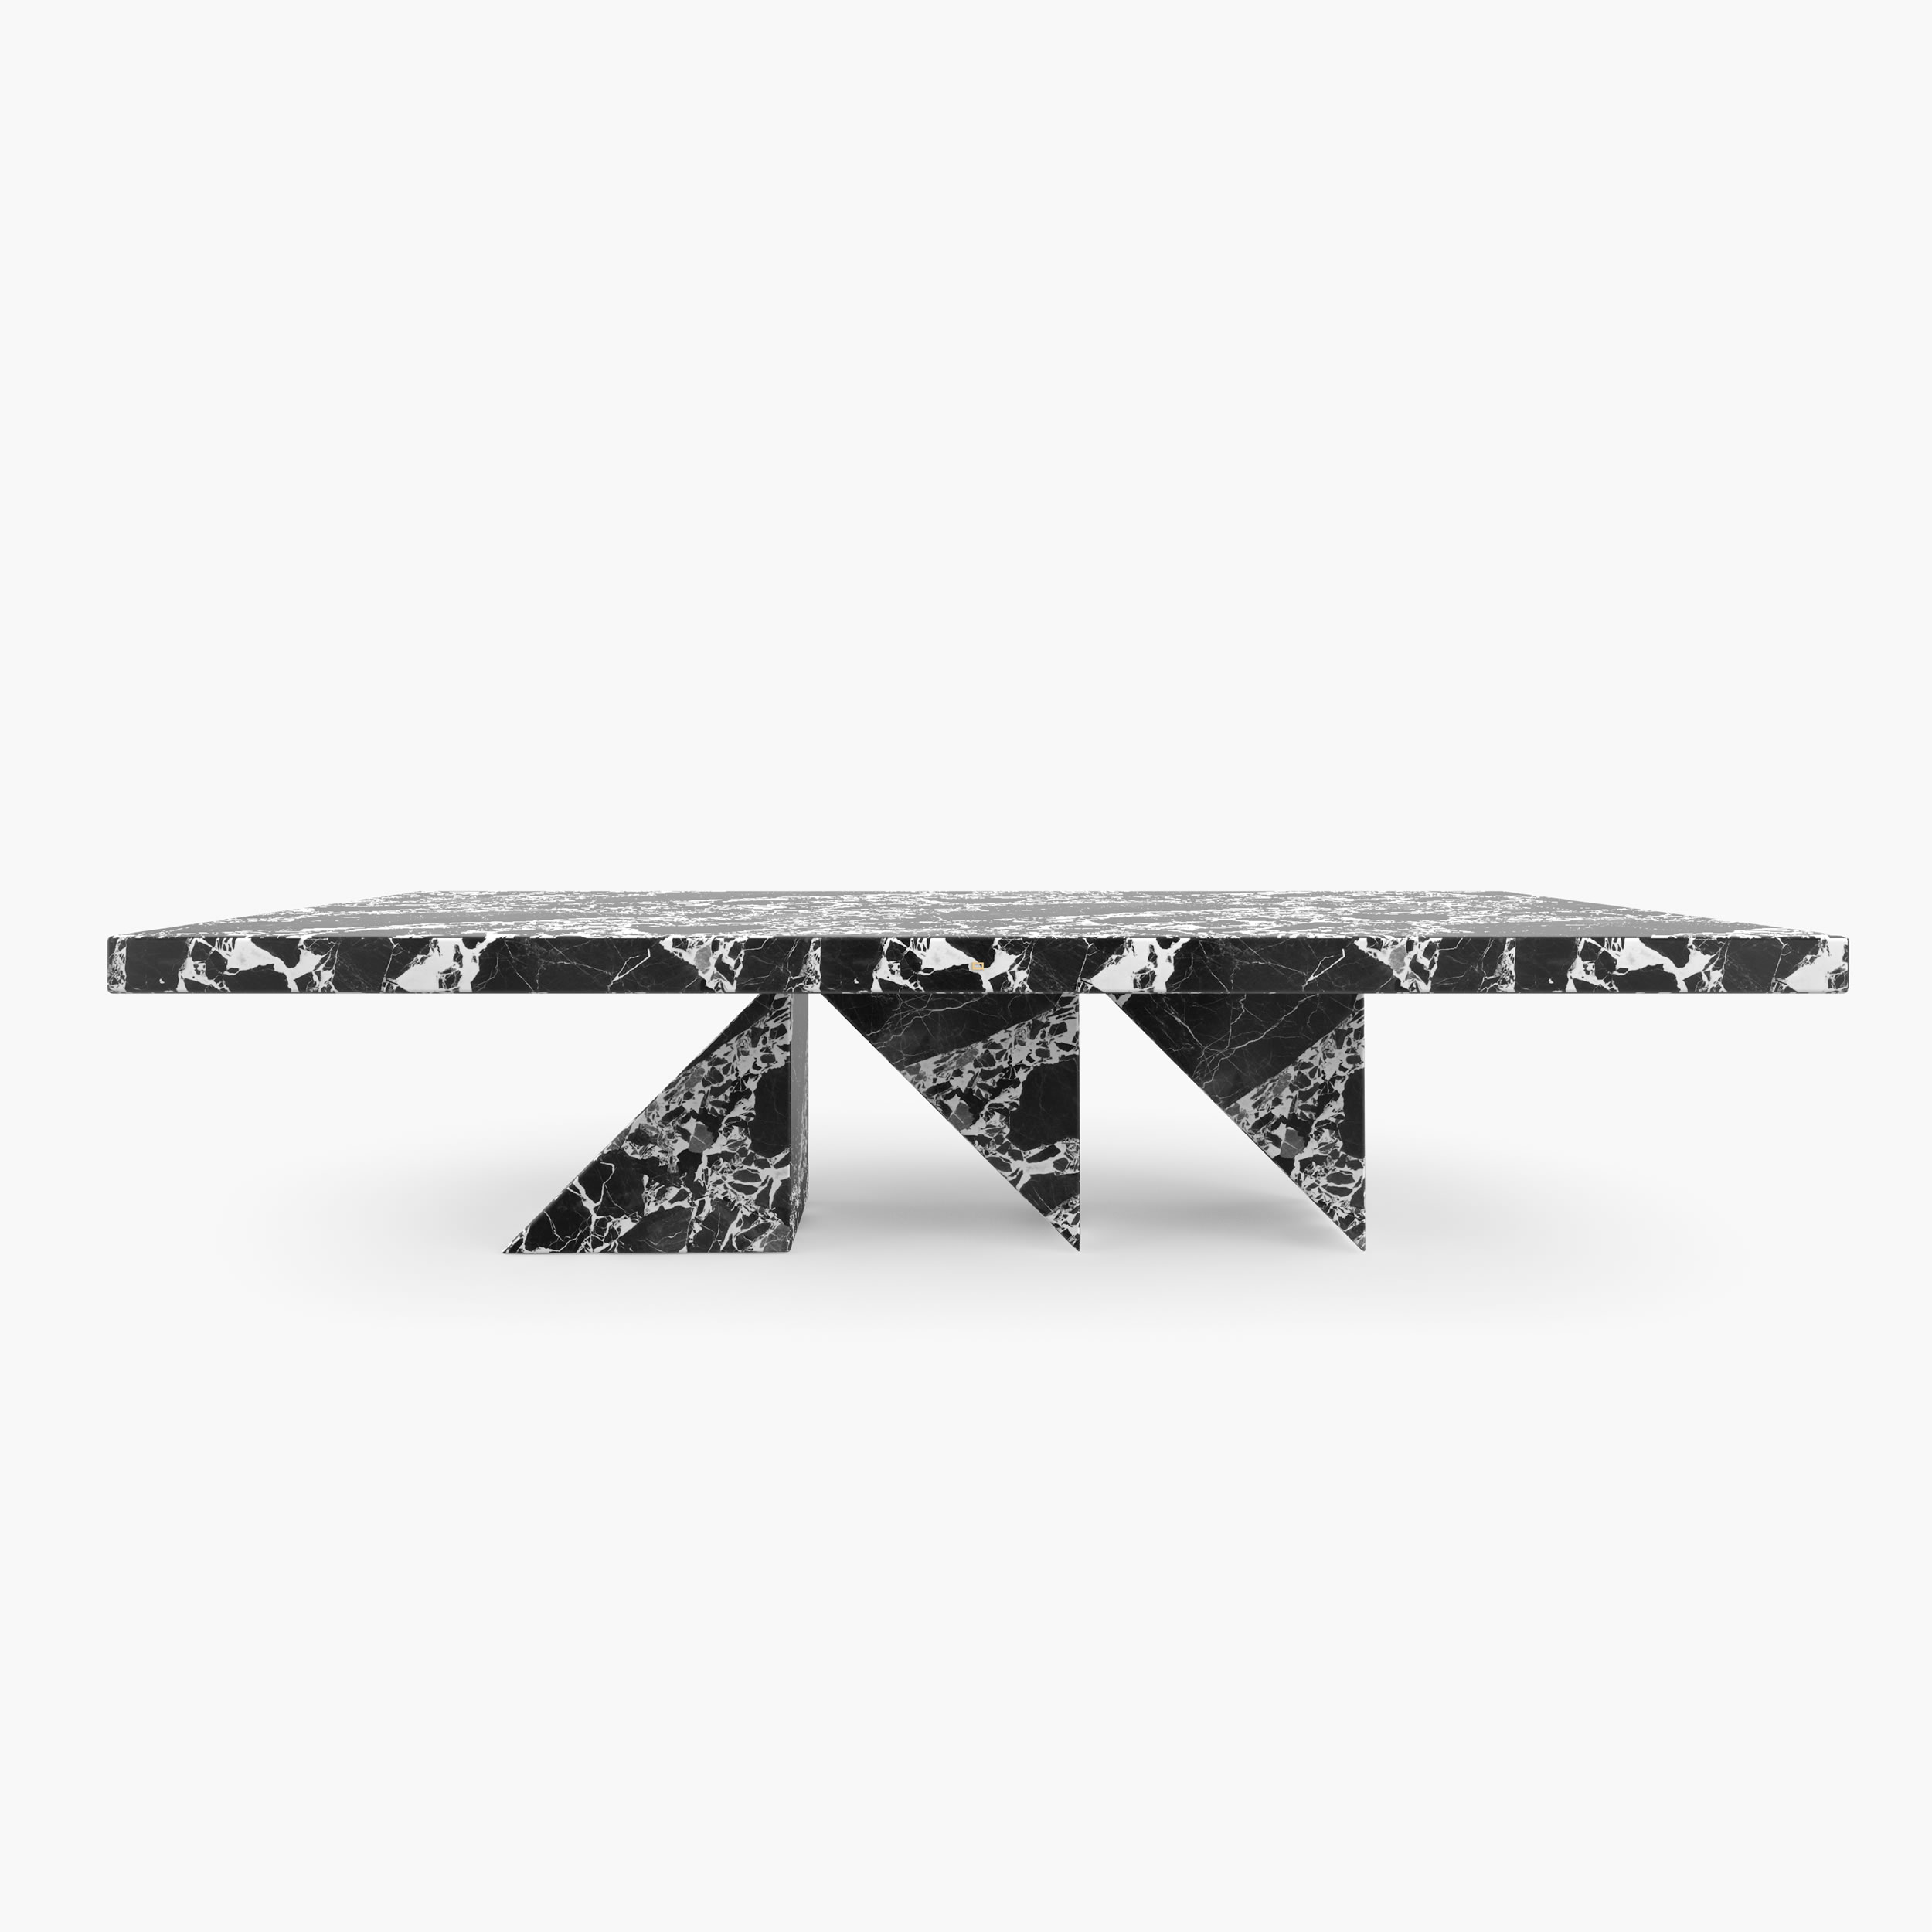 Dining Table Prisms legs White Grand Antique Marble unfathomable simplicity Dining Room minimalism Dining Tables FS 190 1 FELIX SCHWAKE